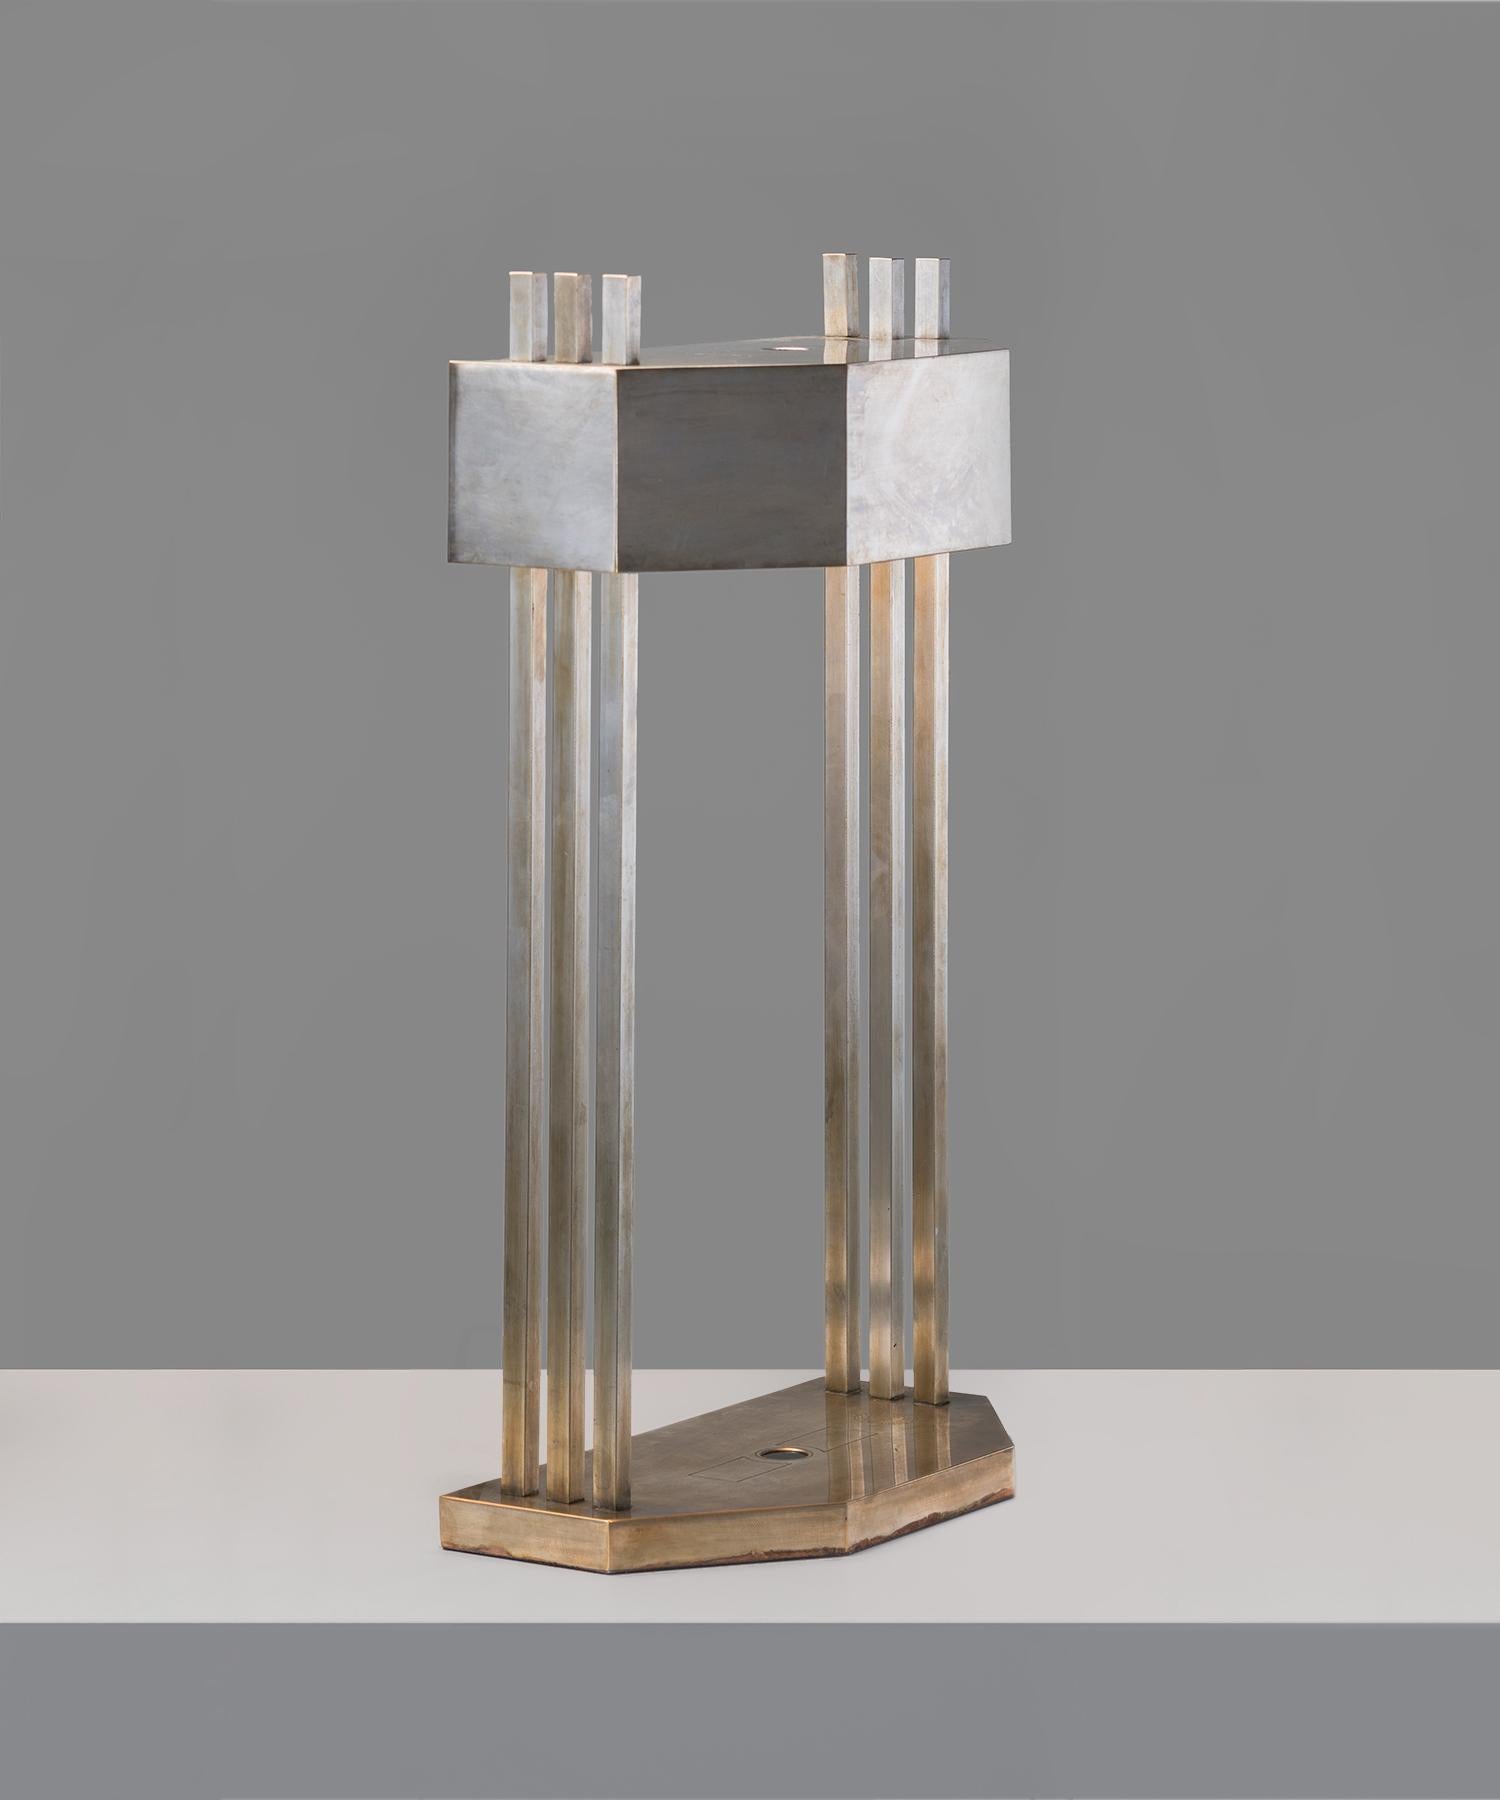 Marcel Breuer Desk Lamp, Germany, circa 1925

Created for the International Exposition of Modern Industrial and Decorative Arts, in Paris; brass-plated nickel and stamped “Exposition Paris 1925”.